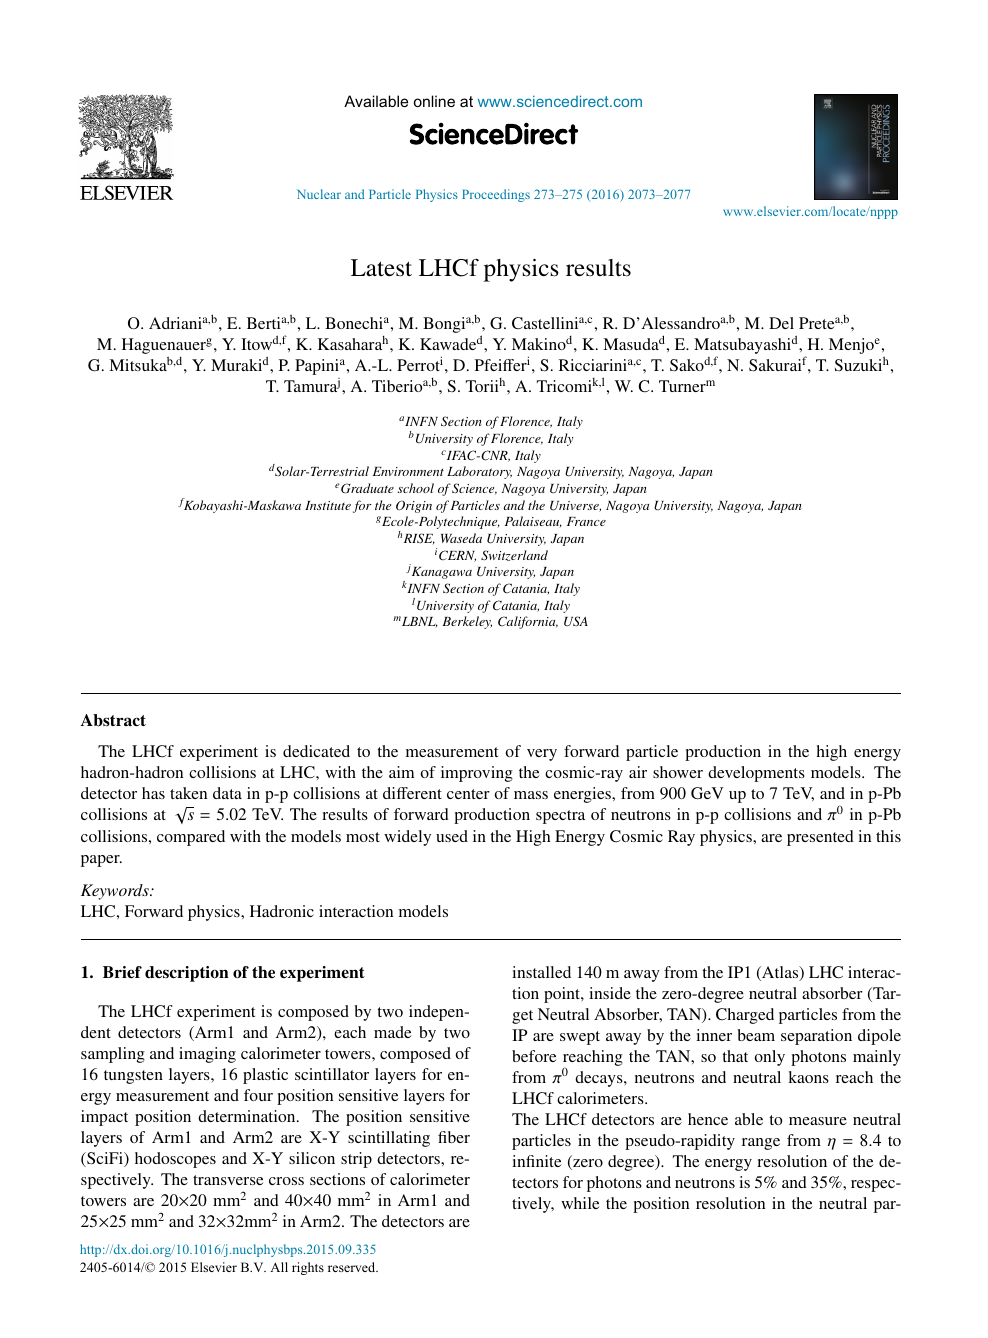 Latest Lhcf Physics Results Topic Of Research Paper In Physical Sciences Download Scholarly Article Pdf And Read For Free On Cyberleninka Open Science Hub